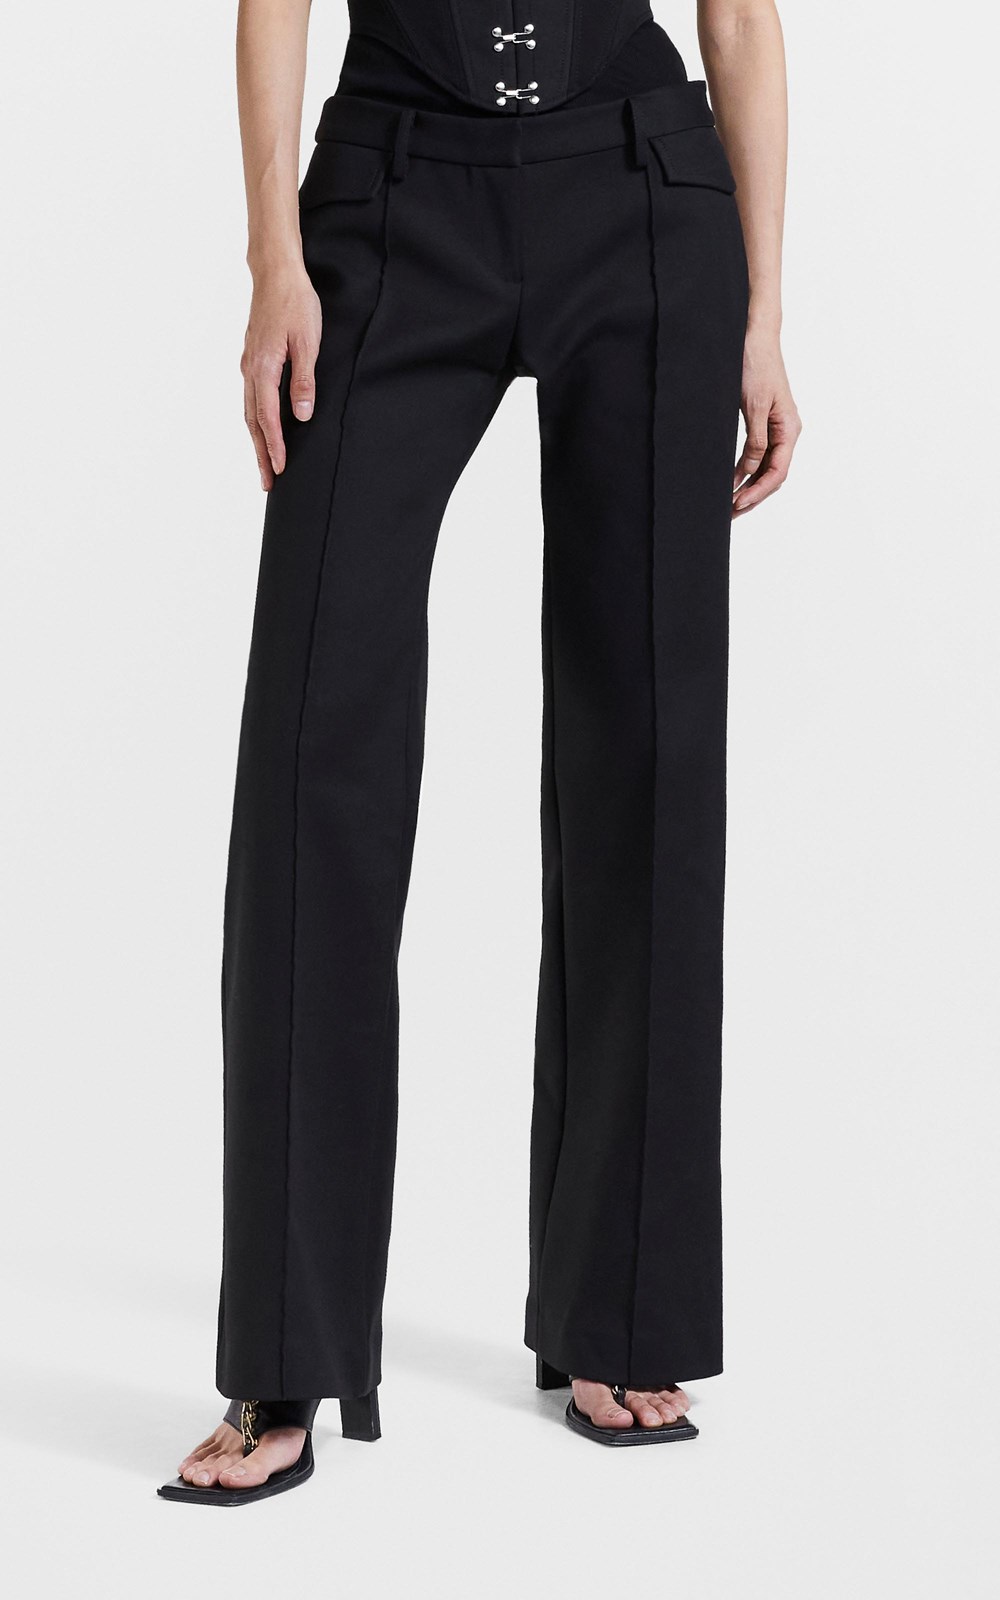 LOW RISE POCKET TROUSER by Dion Lee